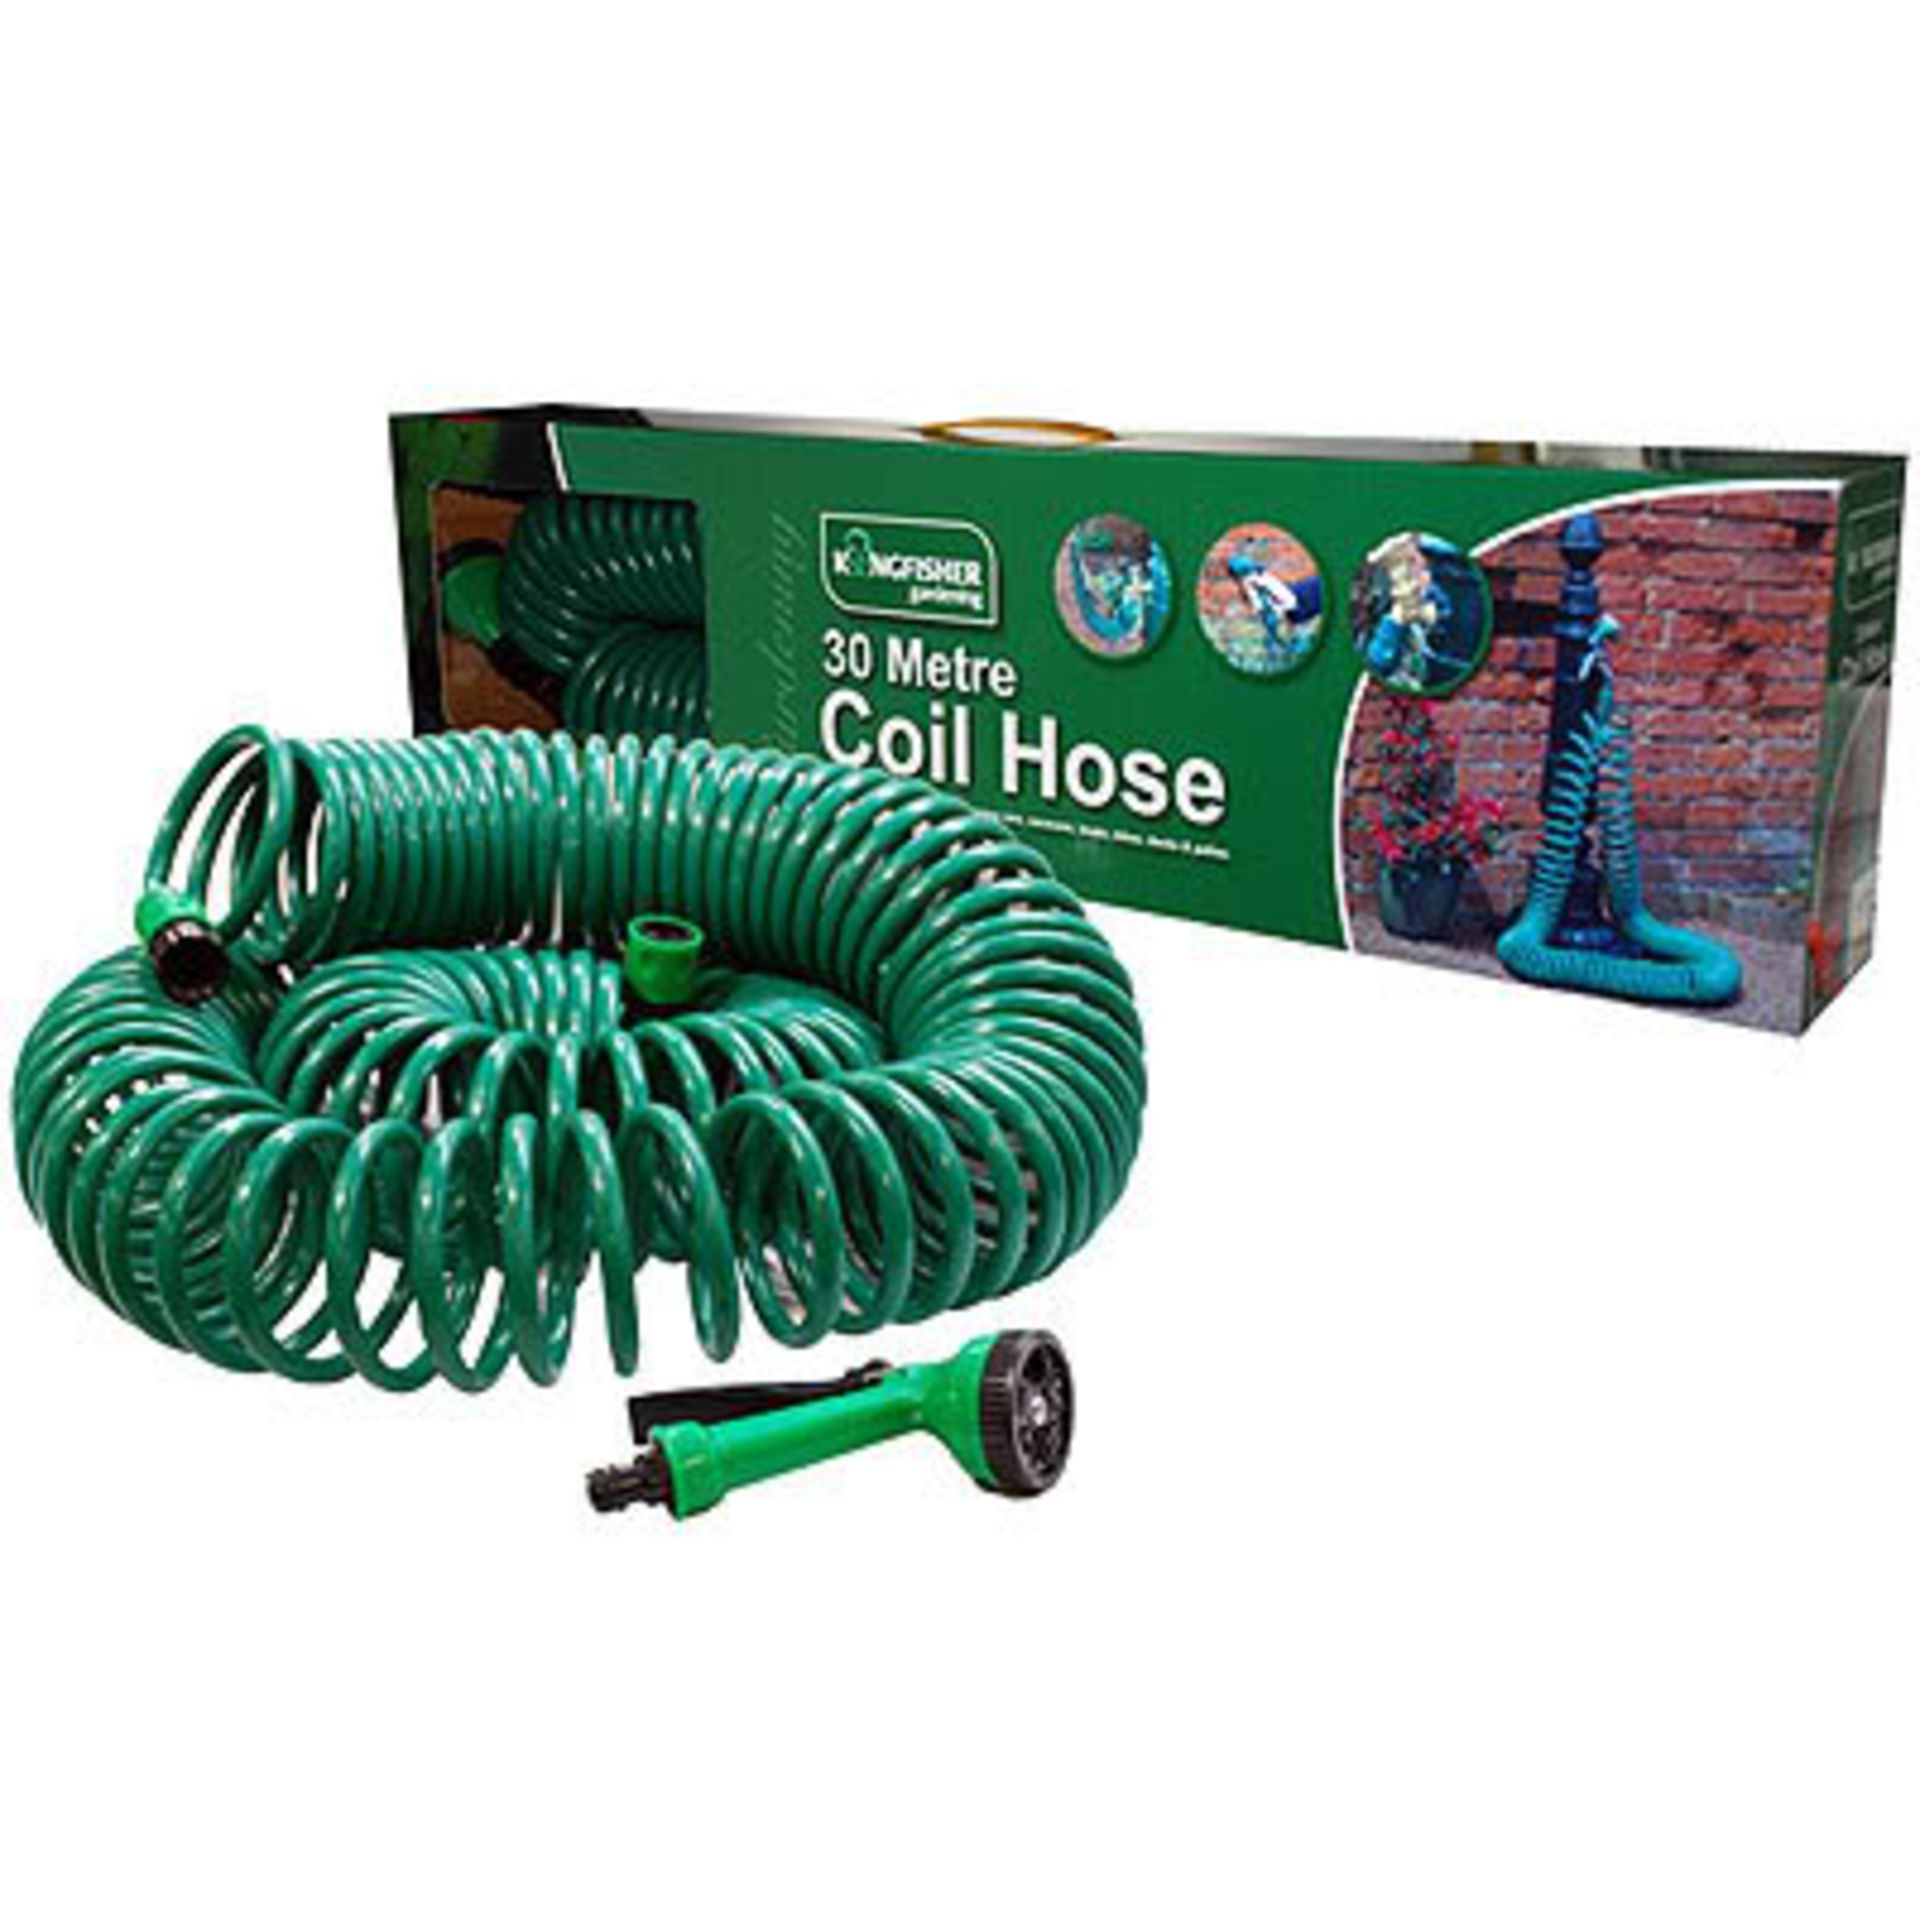 V Brand New 30 Metre Coil Hose With Nozzle And Tap Connectors Etc